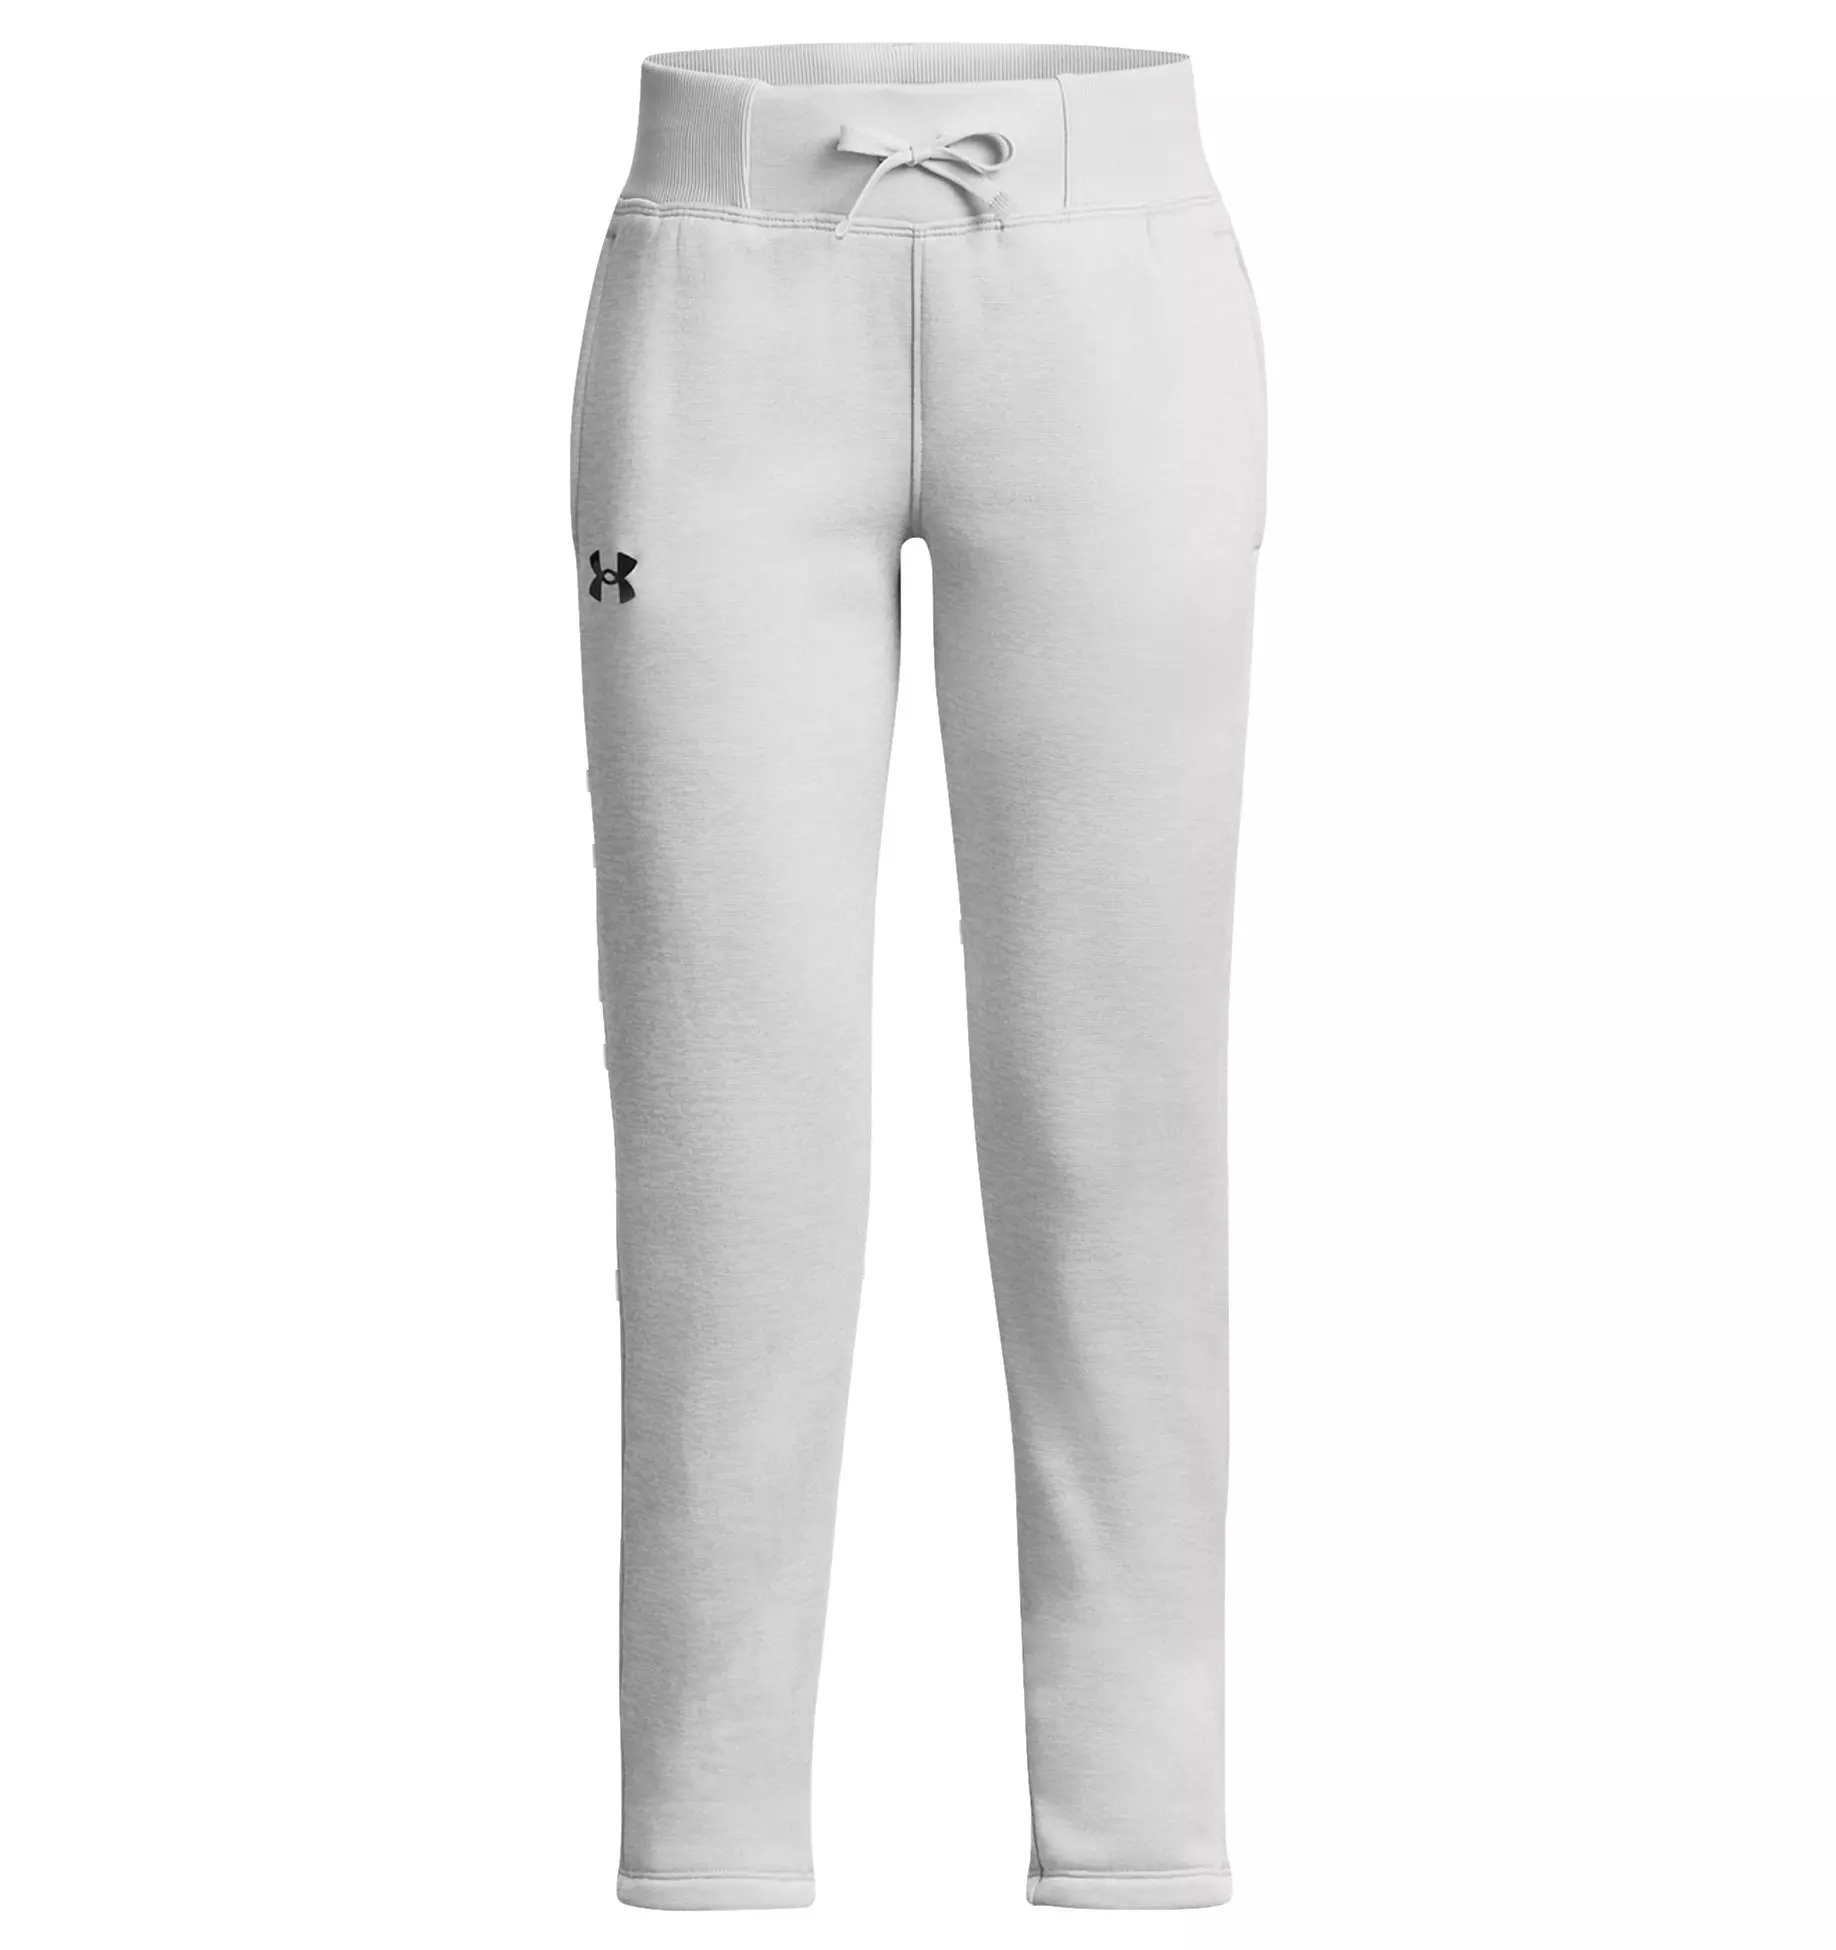 NWT Under Armour women's joggers. Made in Jordan. 100% polyester. Size  small.